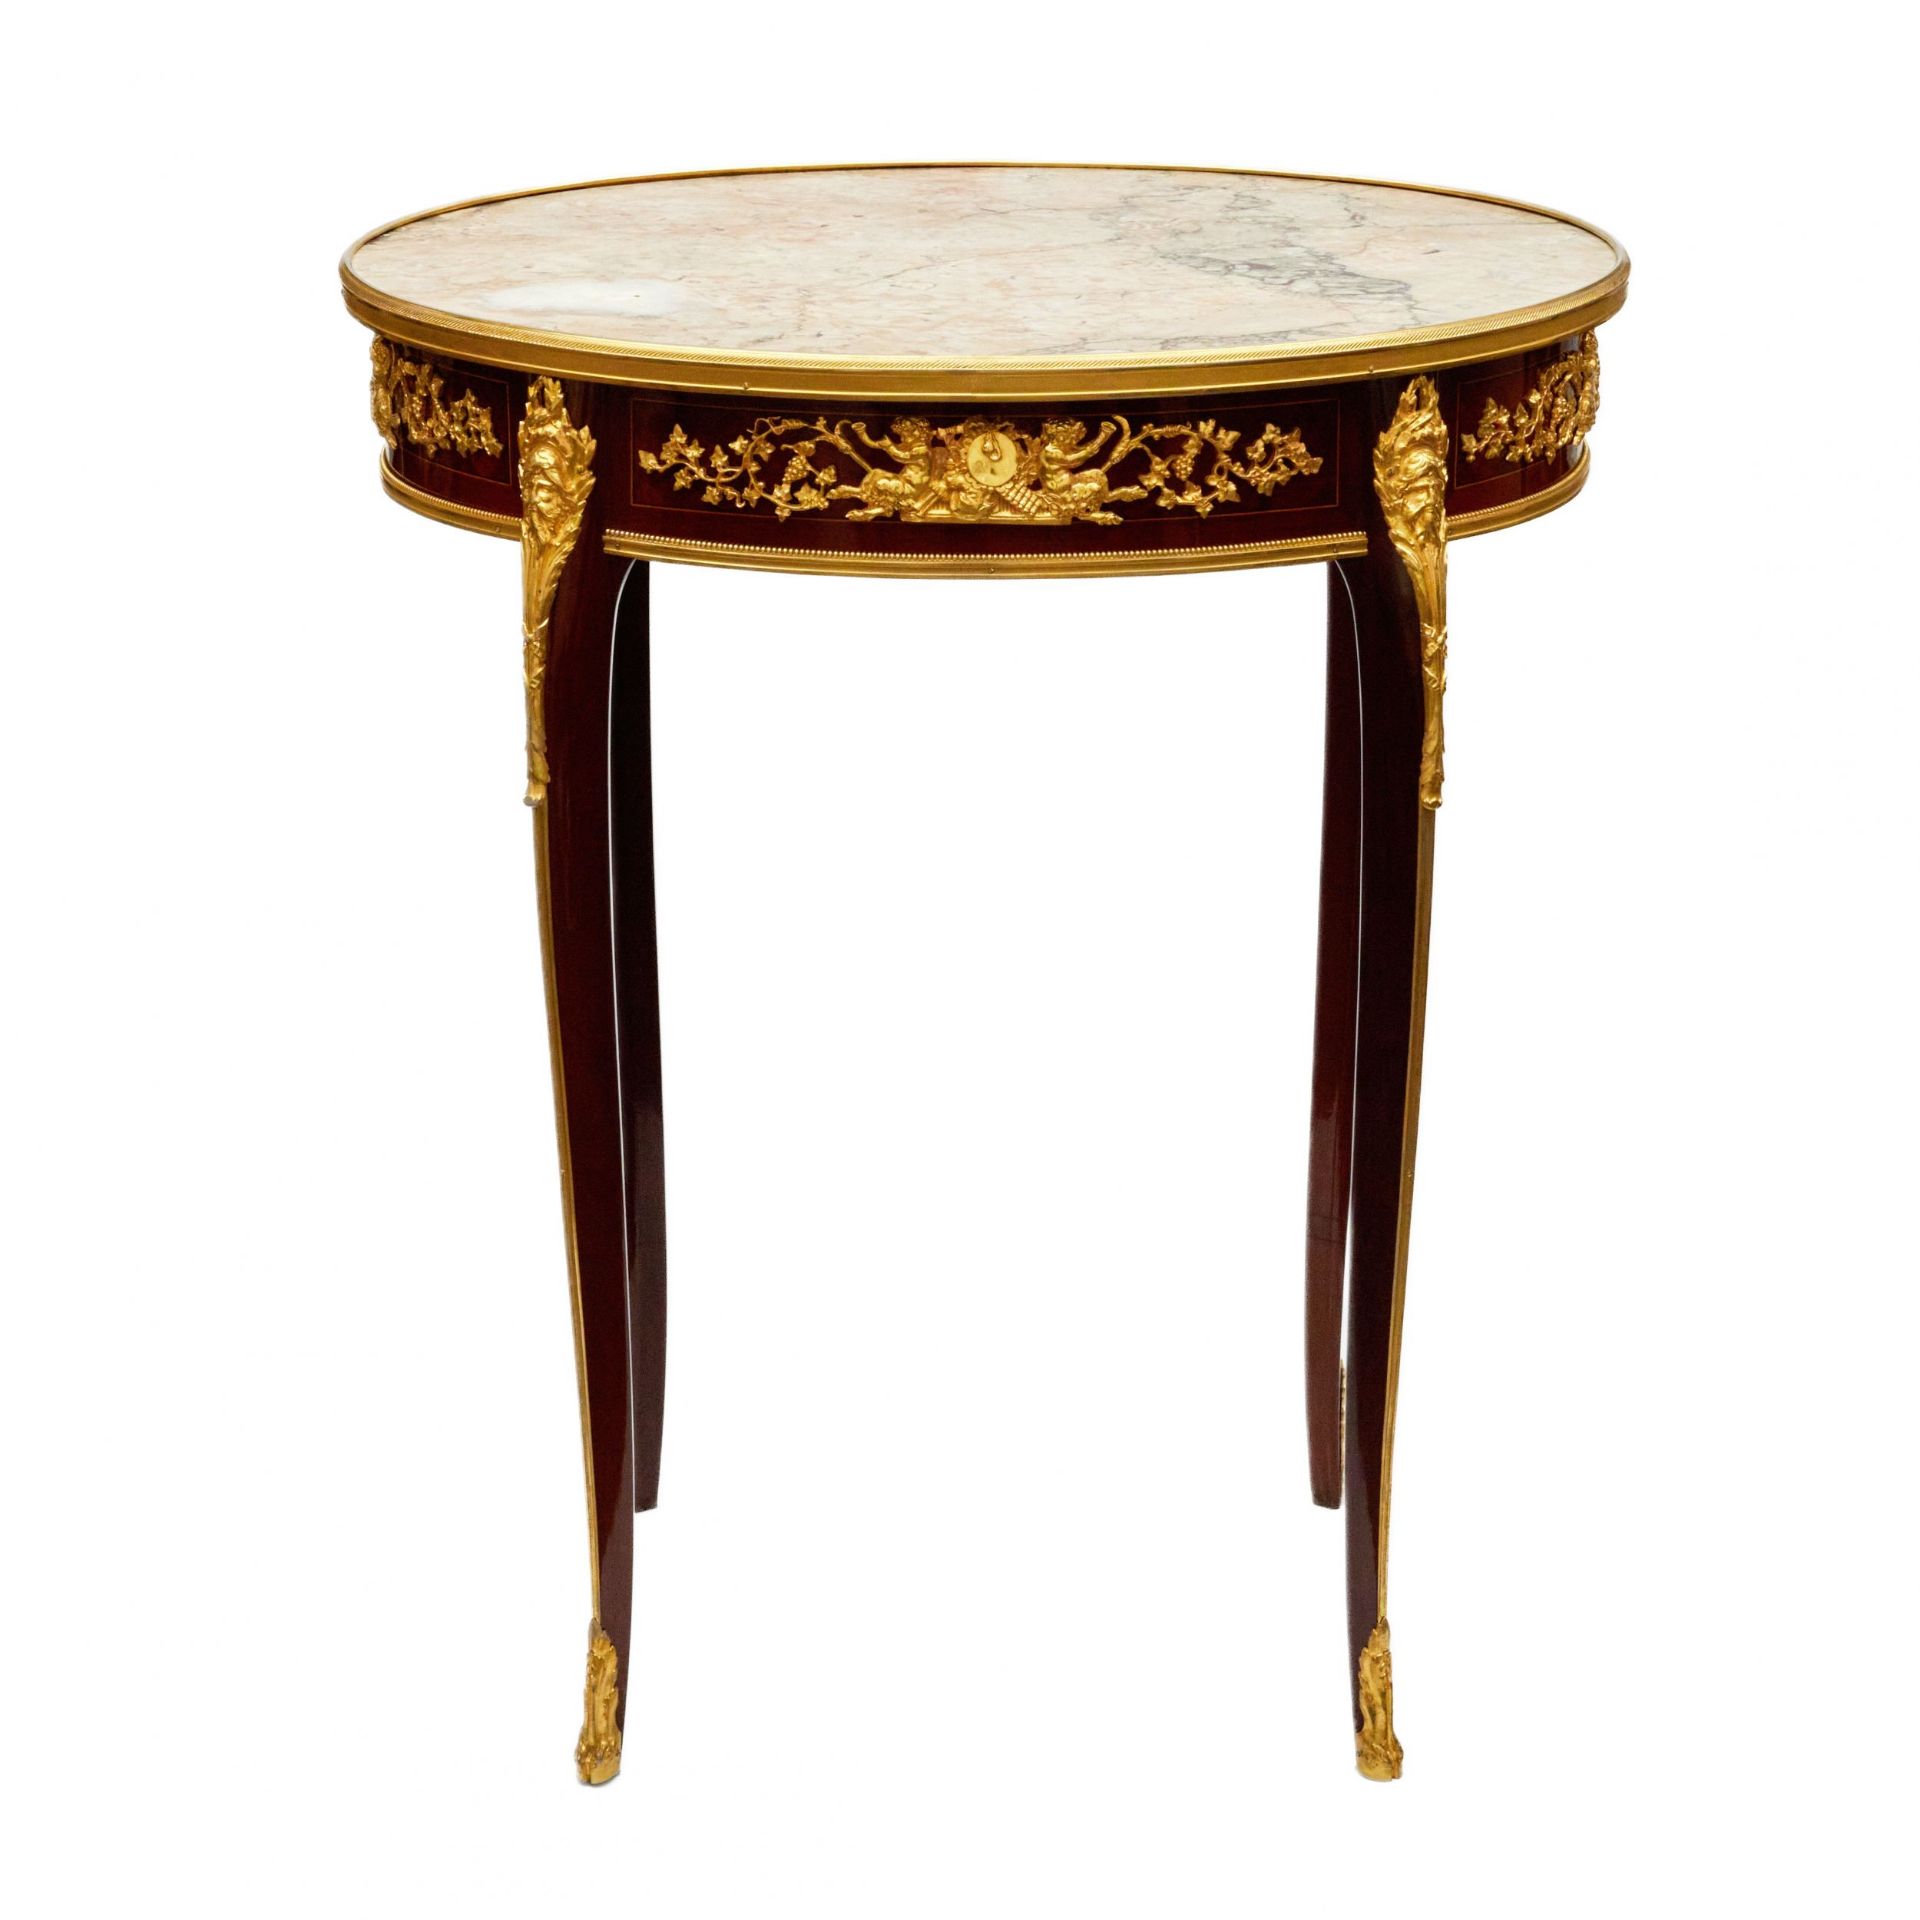 Magnificent mahogany and gilded bronze table by Francois Linke.